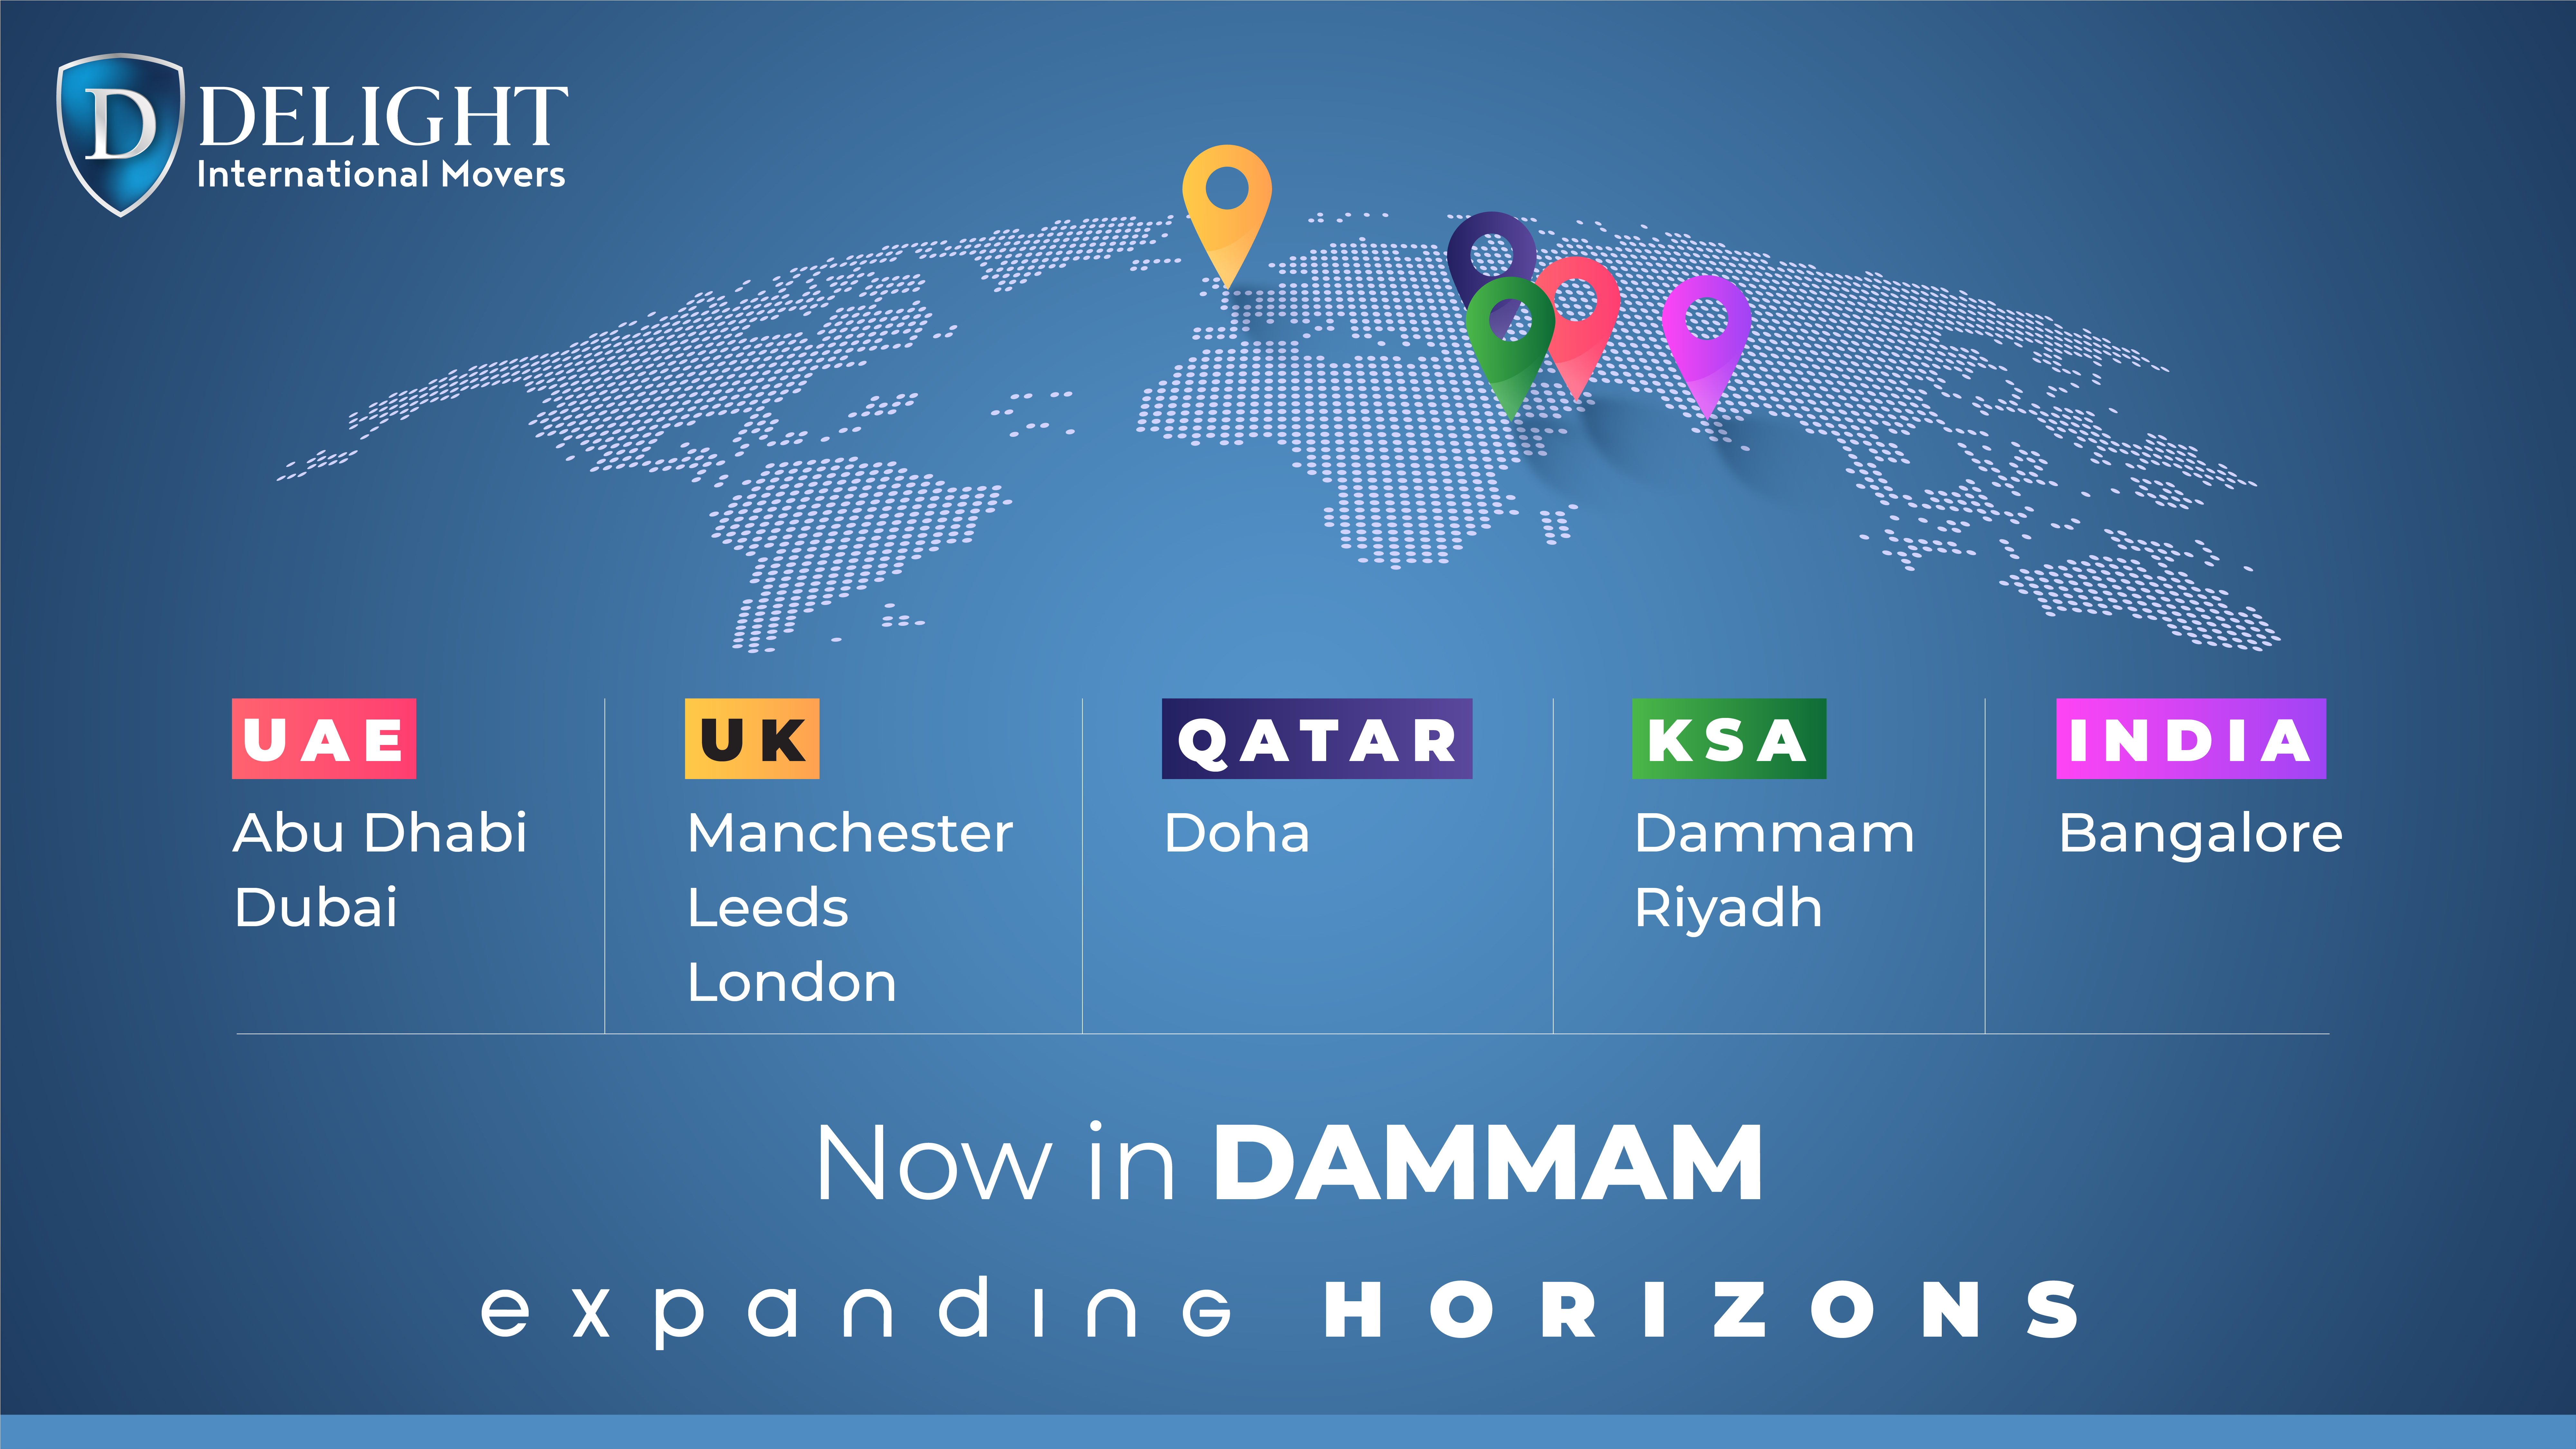 Delight International Movers is broadening our business horizons. We are now in KSA!